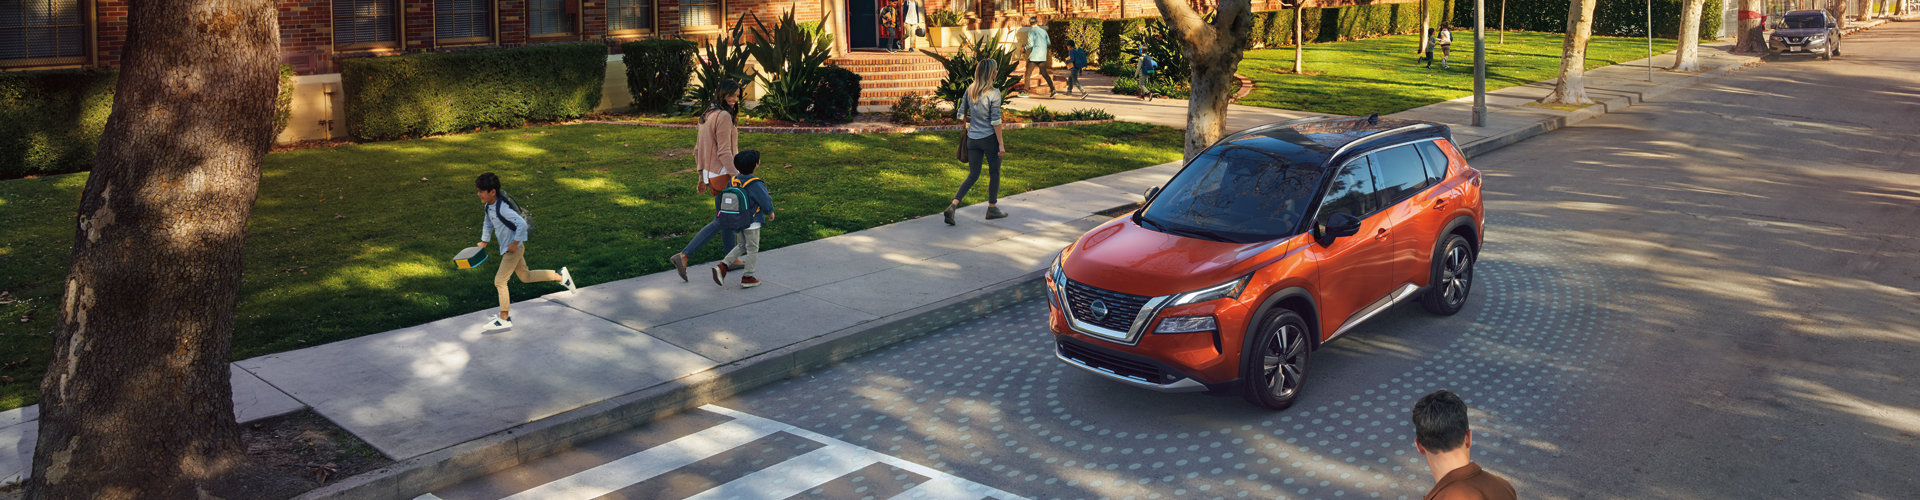 New Nissan Rogue in School Zone with Safety Features Shown